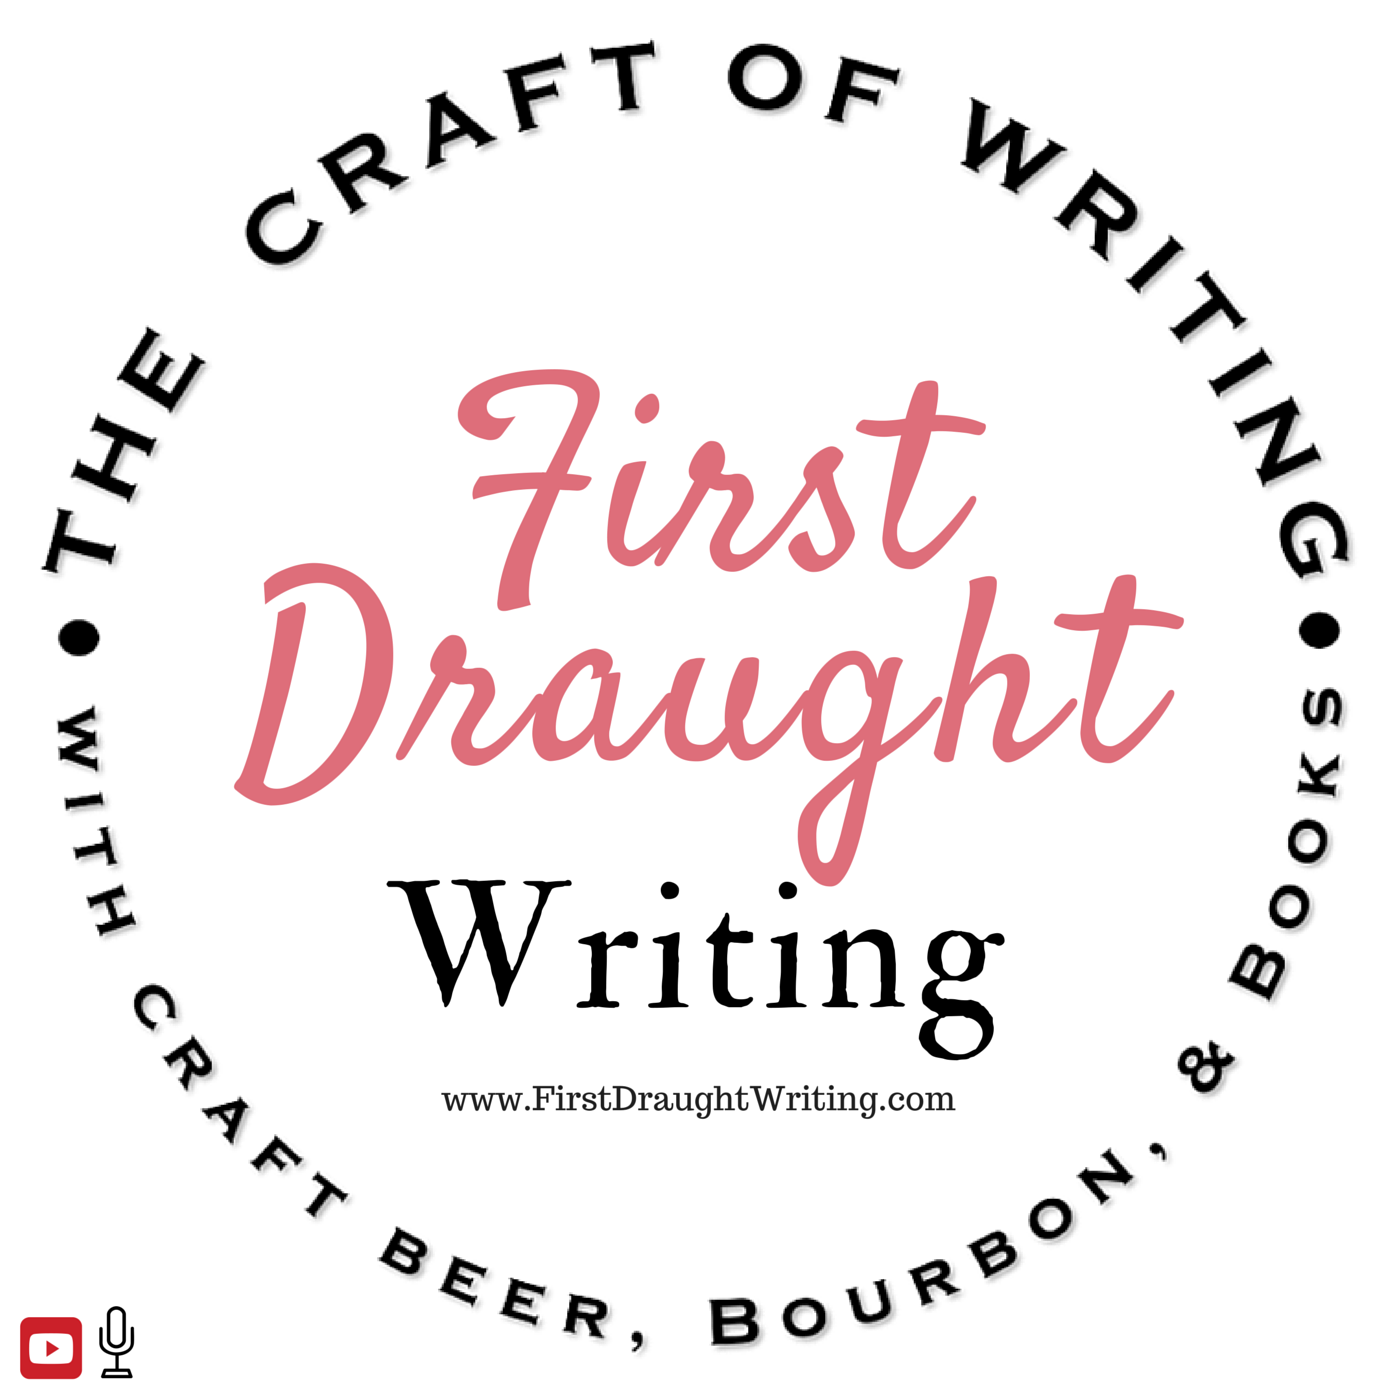 First Draught Writing